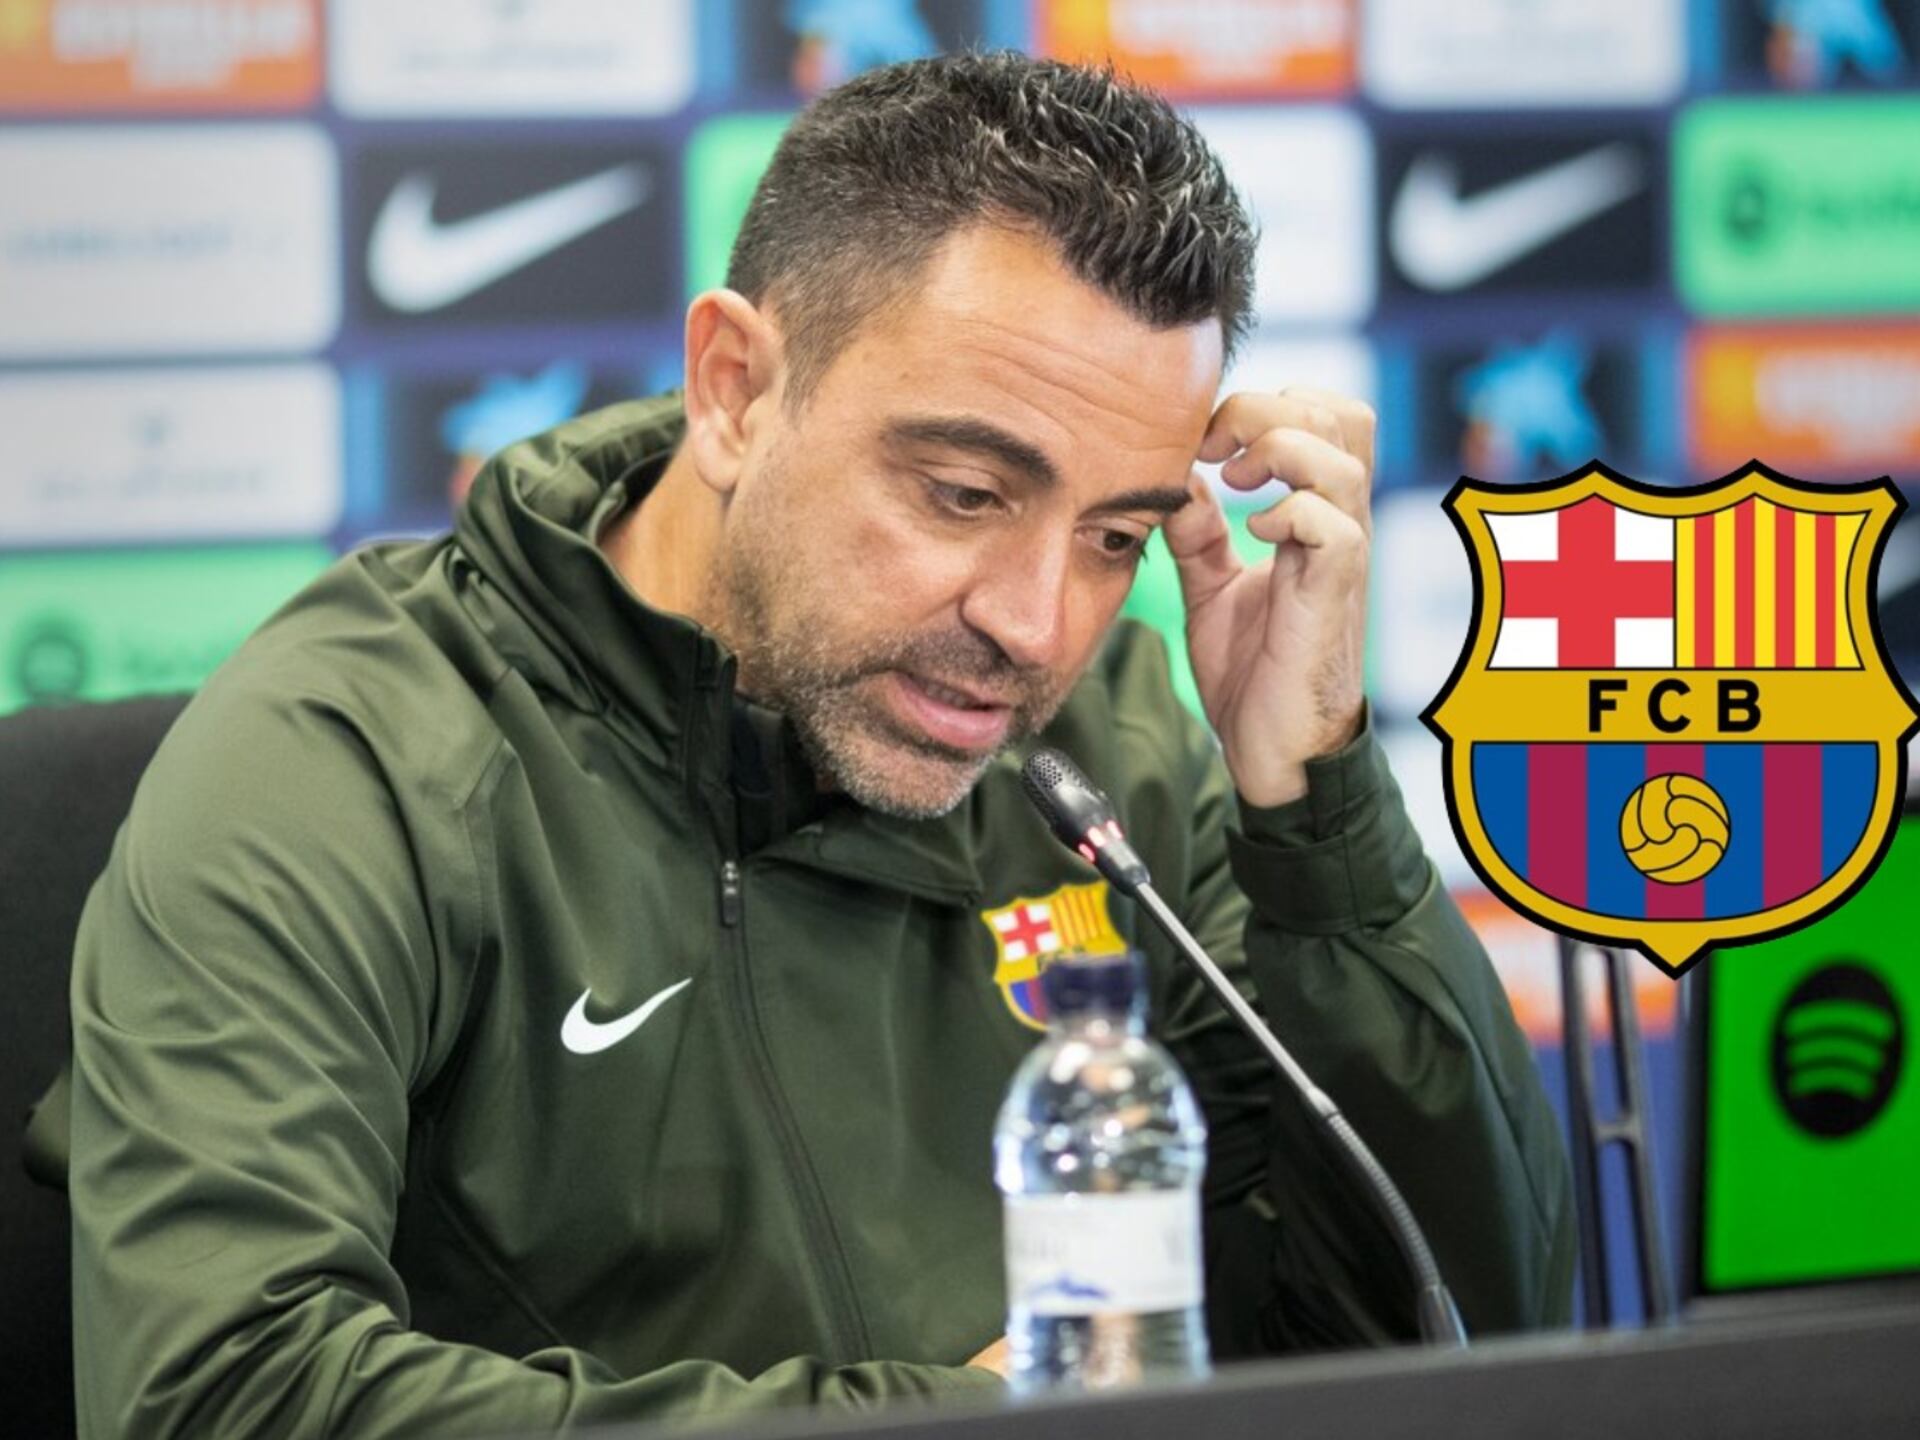 Besides losing an important amount of money for signings, the reason why firing Xavi wouldn’t be Barca’s best option